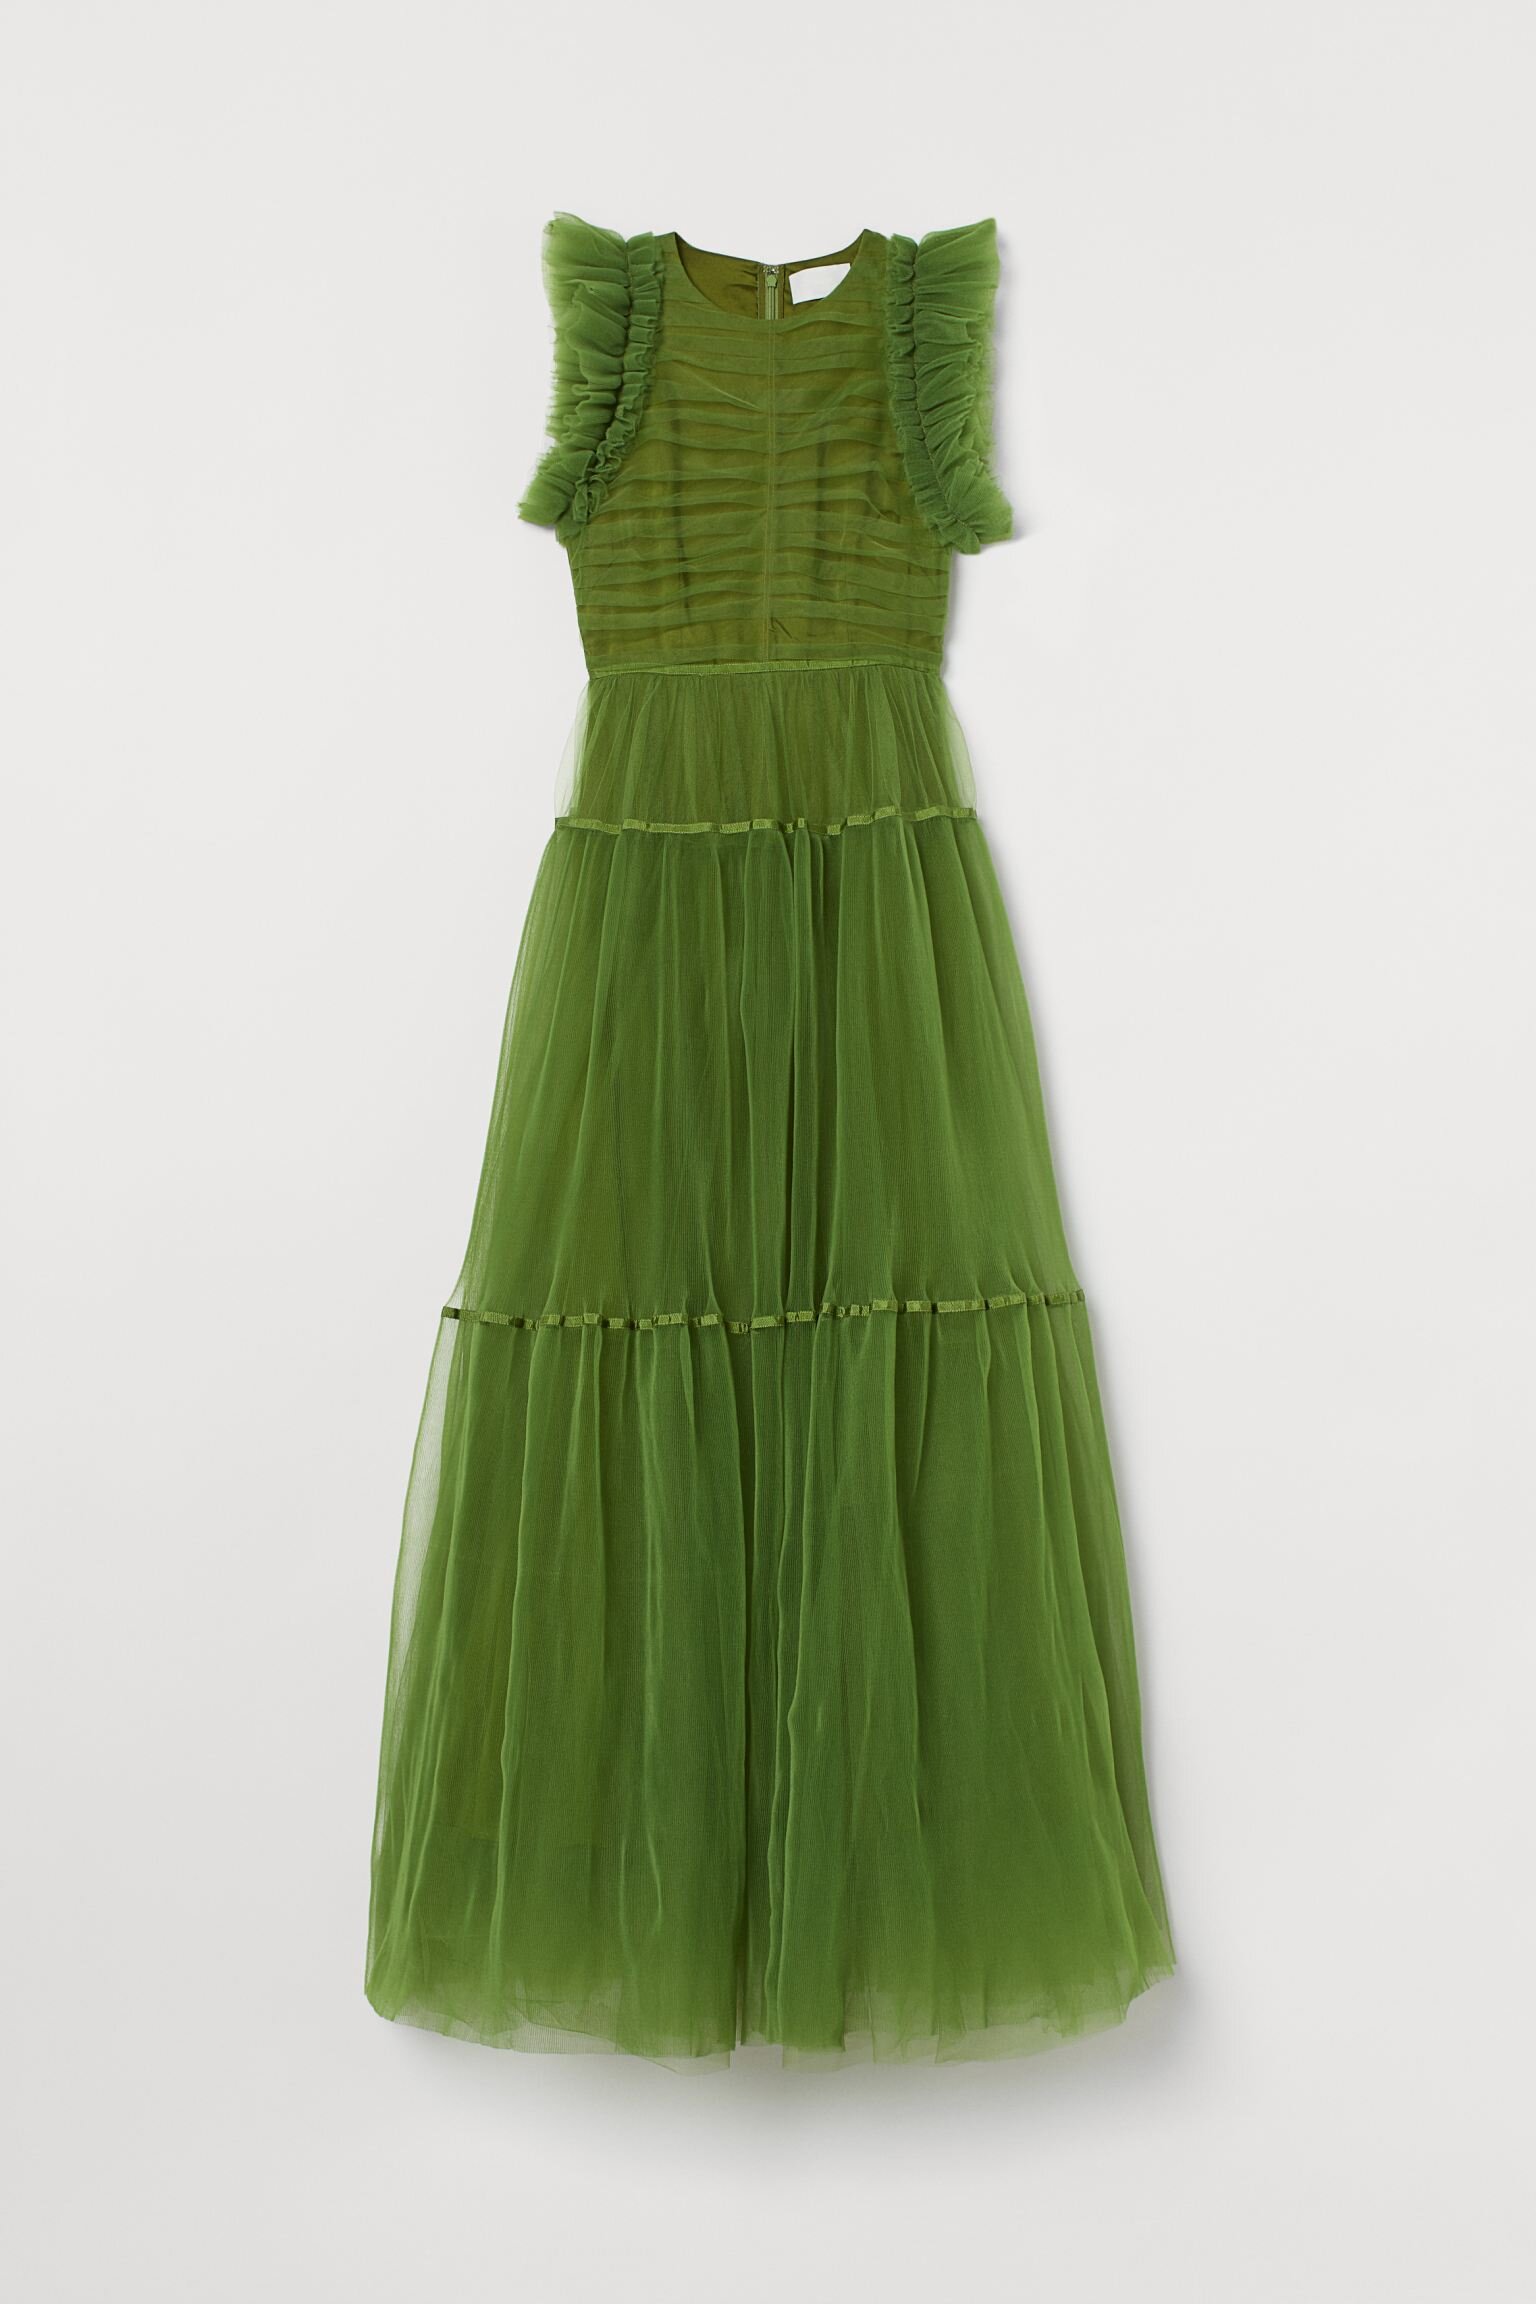 H&M Conscious Collection Tulle Dress in Green — UFO No More